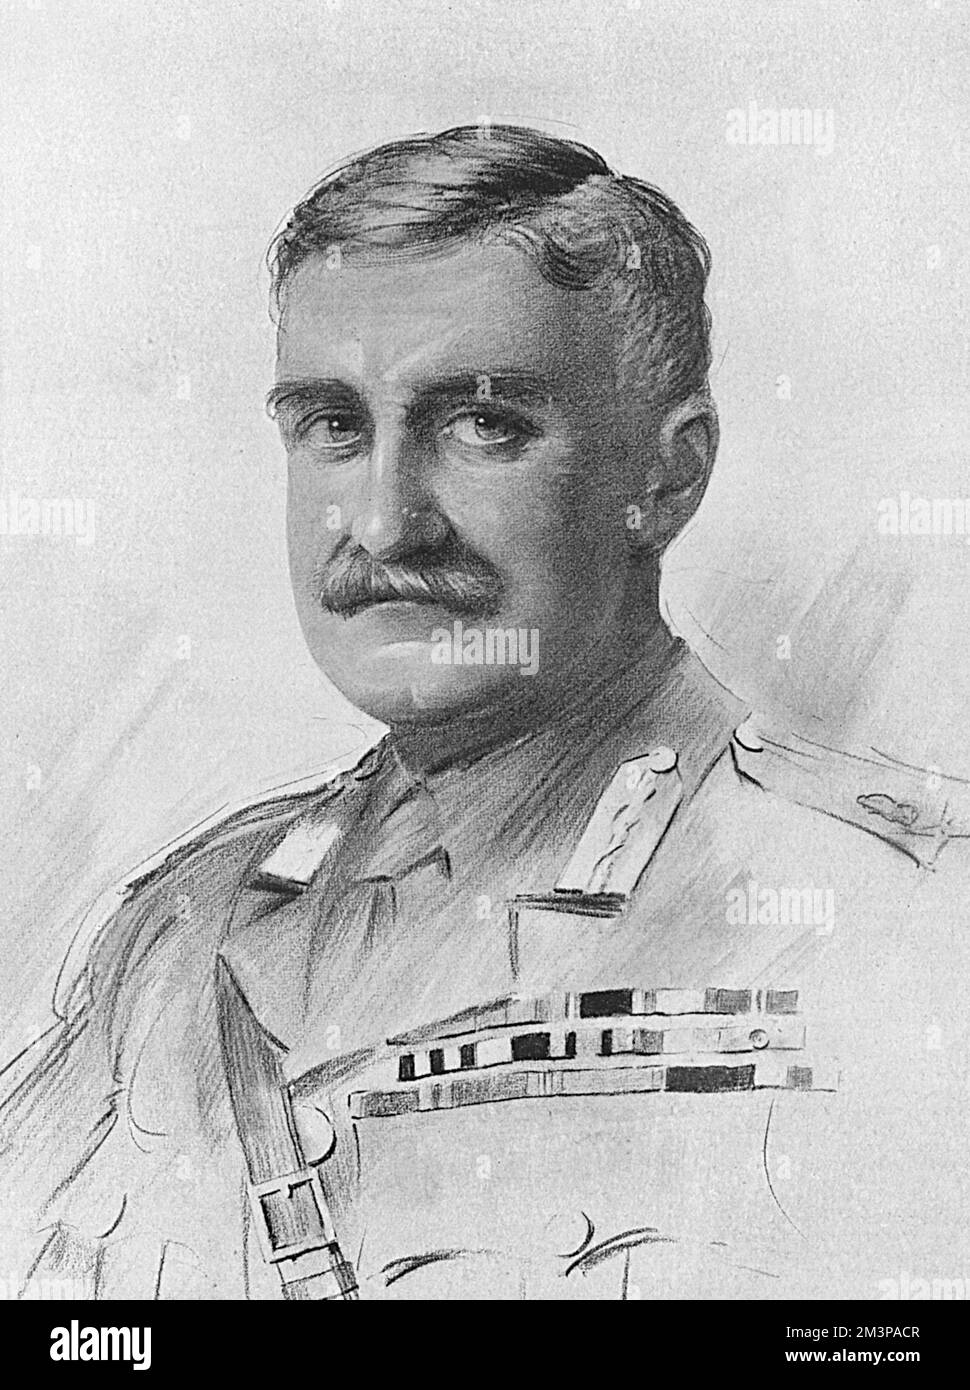 General Sir John Grenfell Maxwell GCB, KCMG, CVO, DSO, PC (11 July 1859  21 February 1929), British Army officer and colonial governor. He served in the Mahdist War in the Sudan, the Boer War, and in the First World War, but he is best known for his role in the suppression of the 1916 Easter Rising in Ireland and subsequent execution of rebellion leaders. He retired in 1922.     Date: 1918 Stock Photo